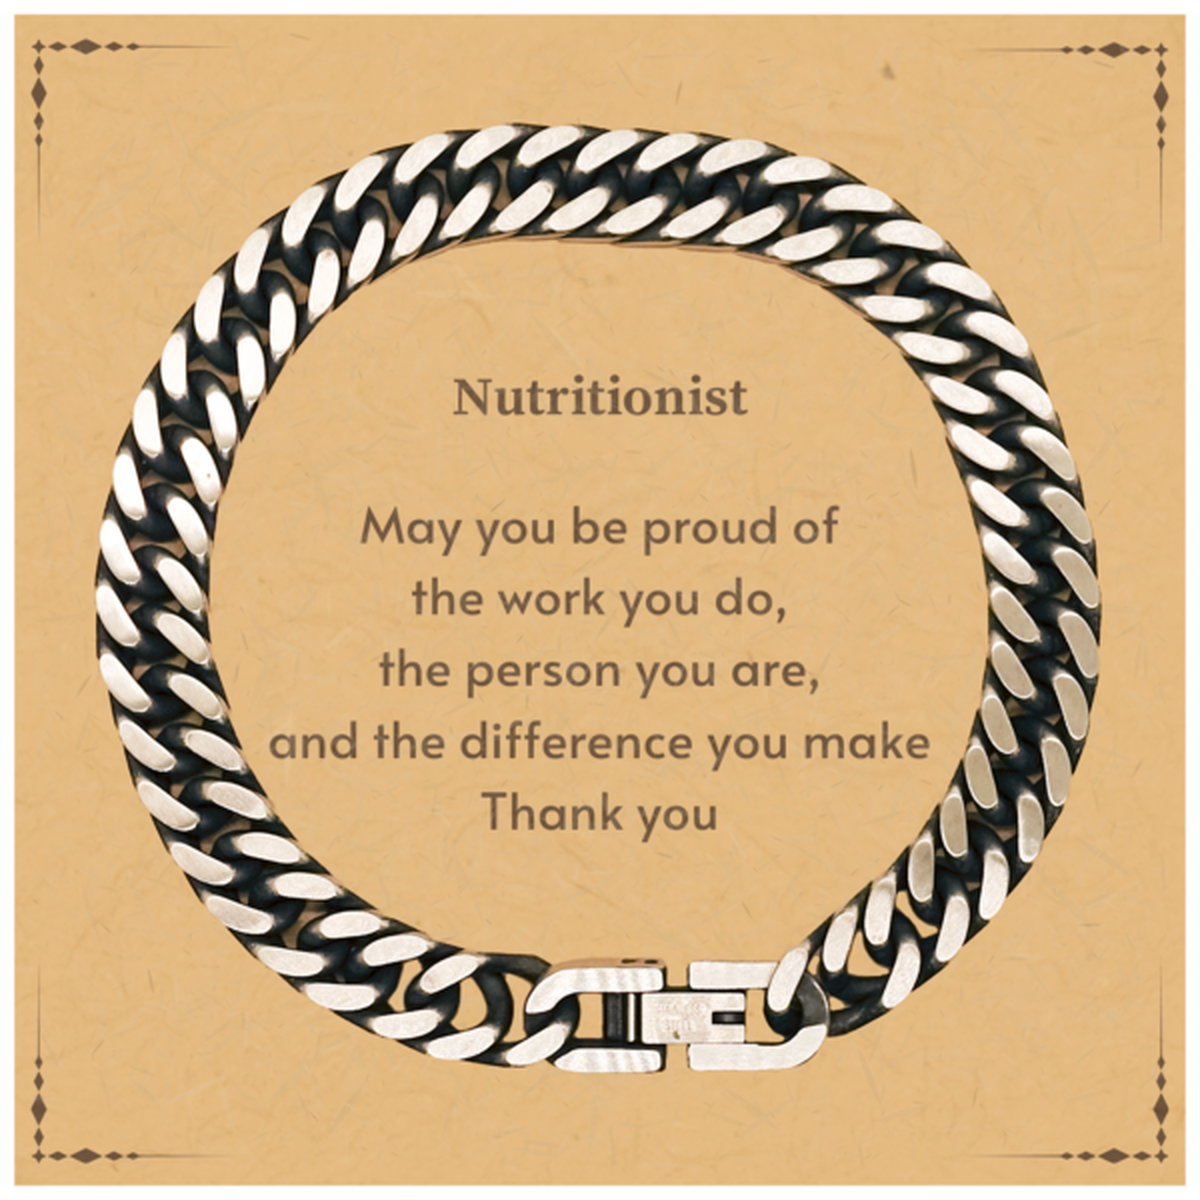 Heartwarming Cuban Link Chain Bracelet Retirement Coworkers Gifts for Nutritionist, Nutritionist May You be proud of the work you do, the person you are Gifts for Boss Men Women Friends